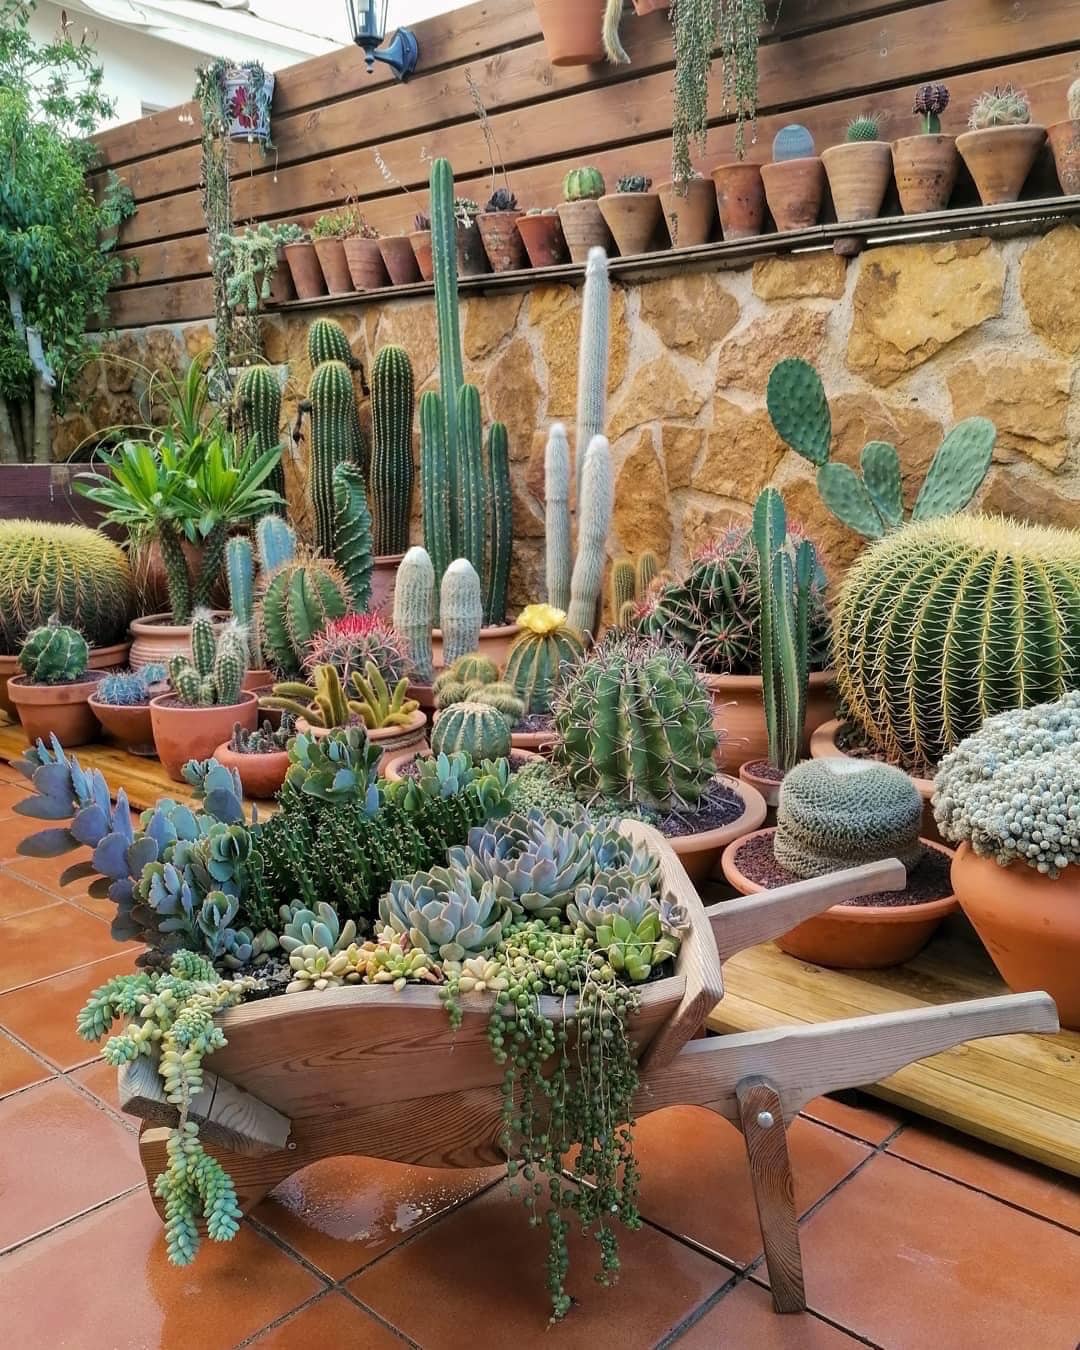 How To Grow And Care For Succulents In Outdoor Space